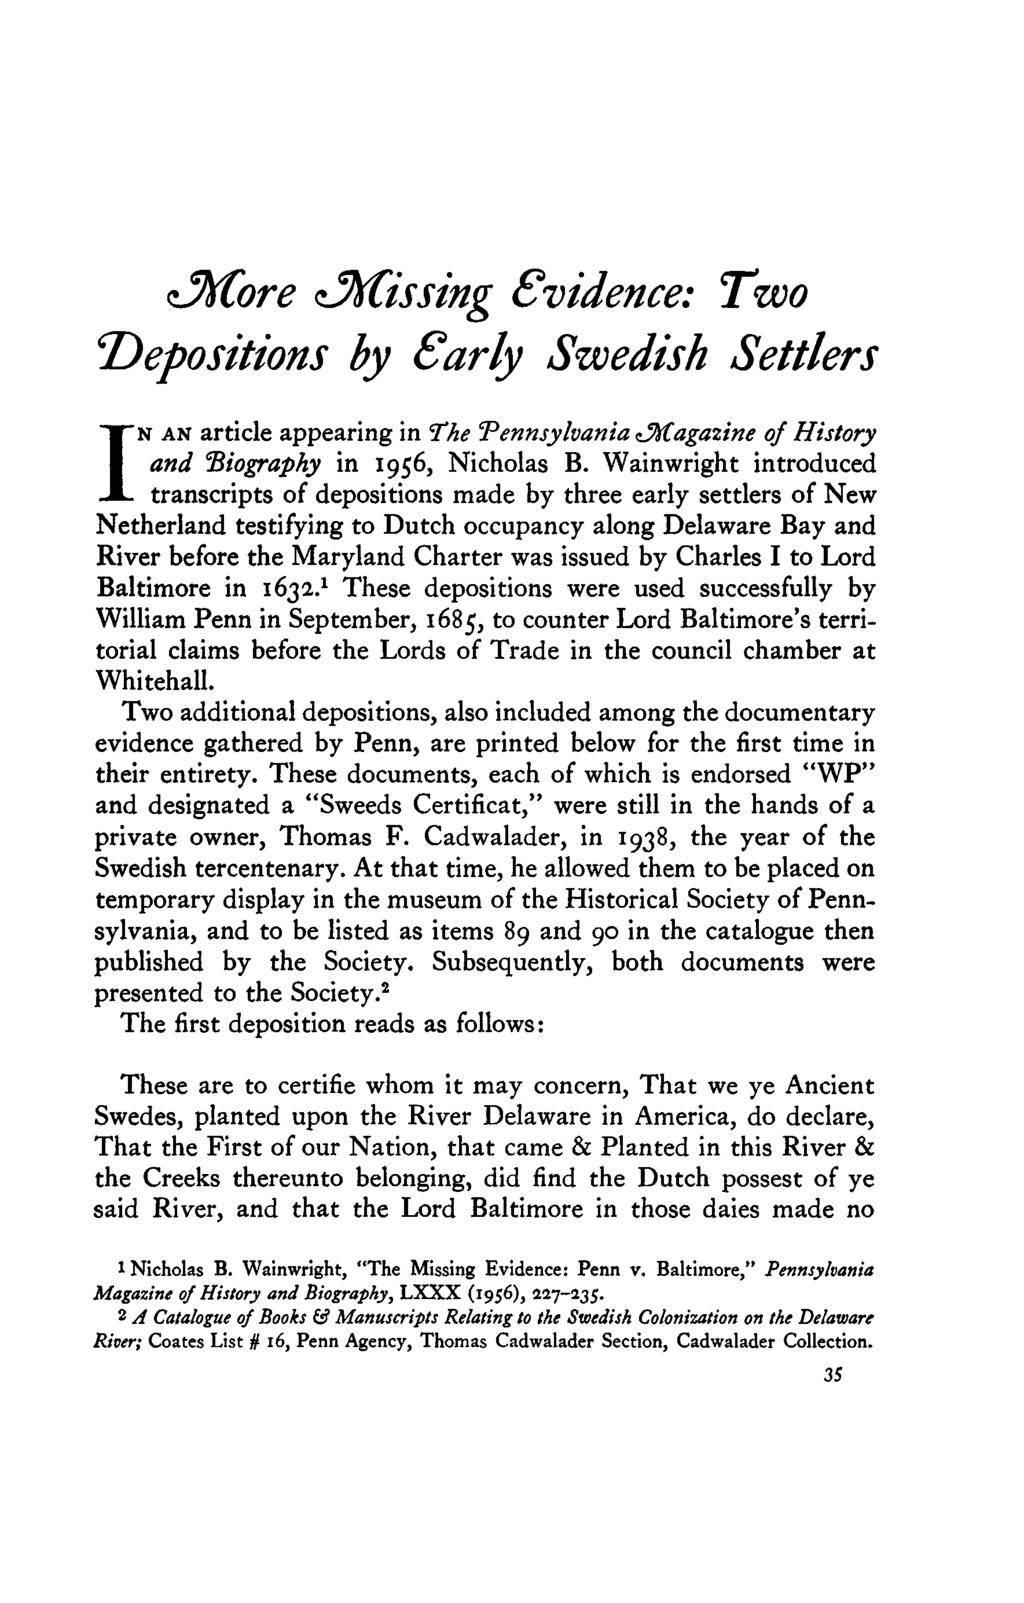 zjfrcore zjxcissing Evidence: Two "Depositions by Sarly Swedish Settlers I N AN article appearing in The Pennsylvania ^Magazine of History and biography in 1956, Nicholas B.